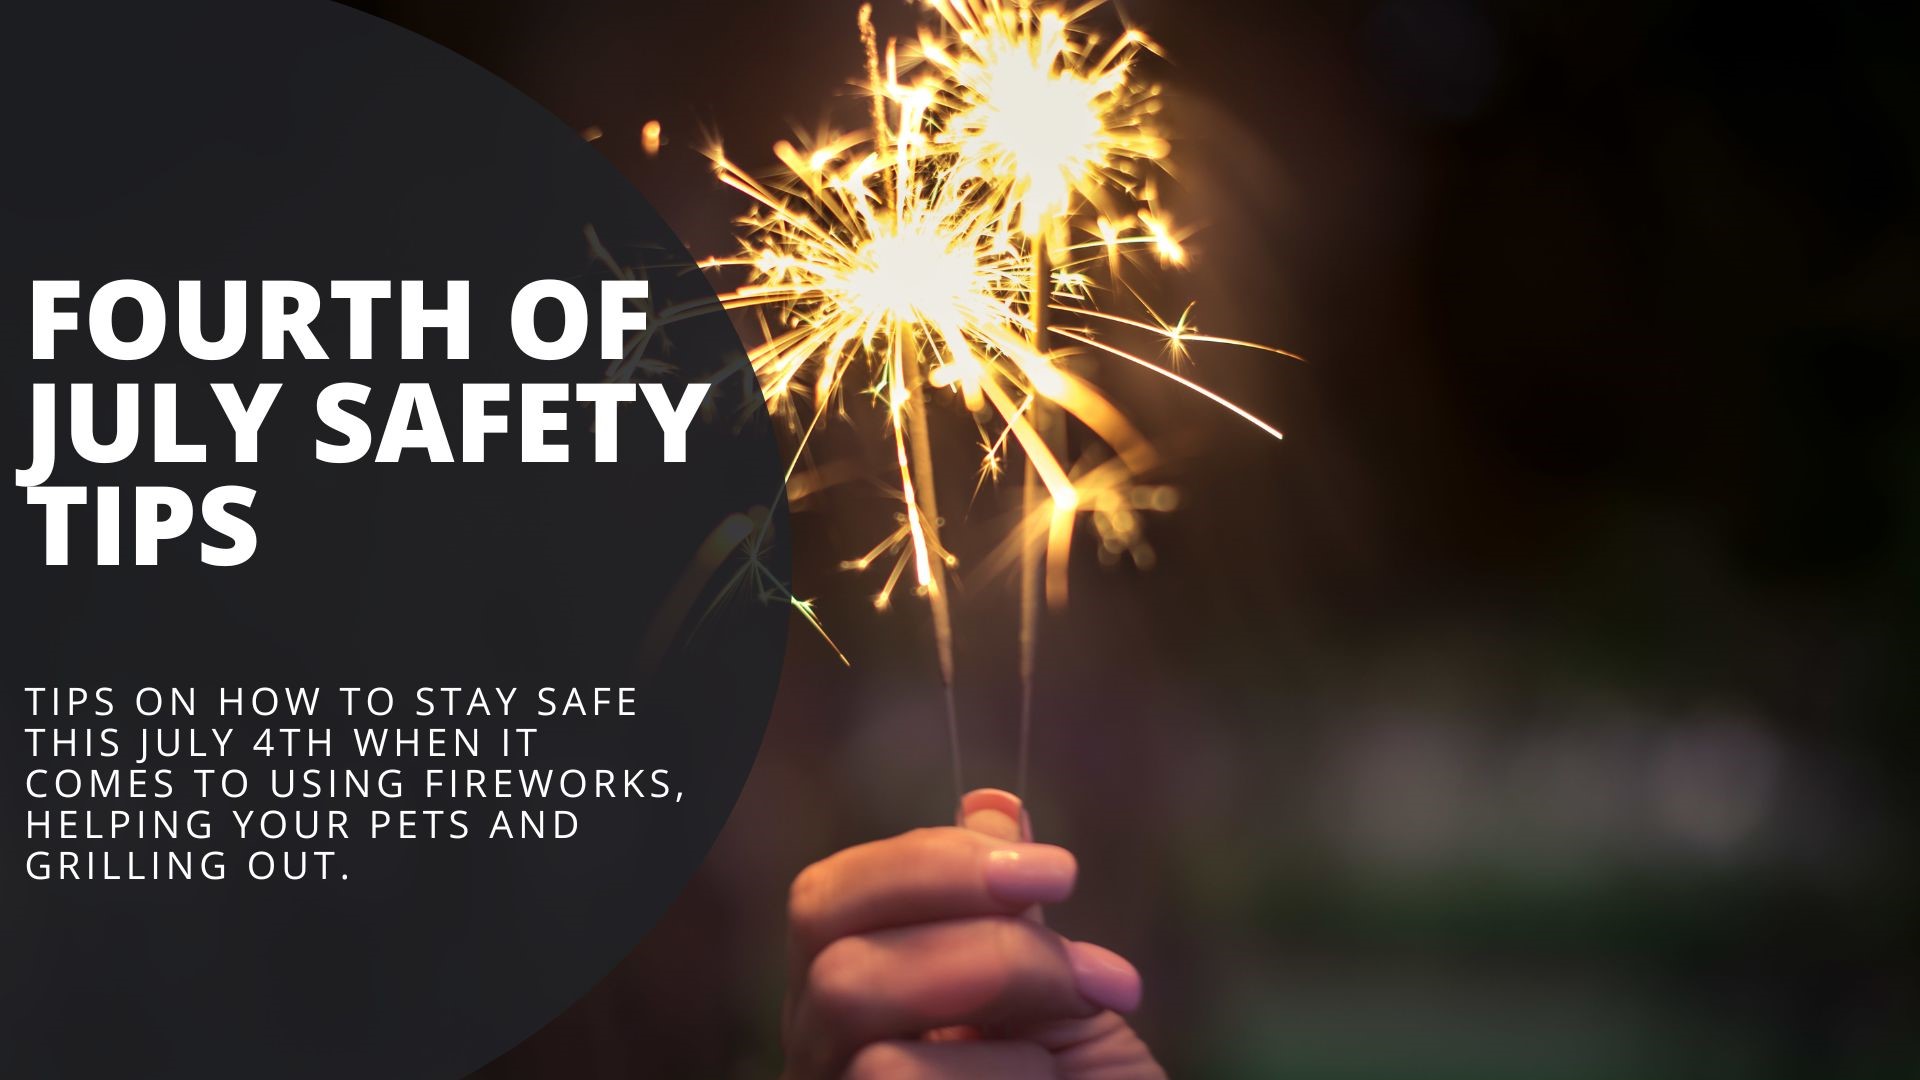 Tips on how to stay safe this July 4th when it comes to lighting off fireworks, helping your pets stay calm and grilling out.